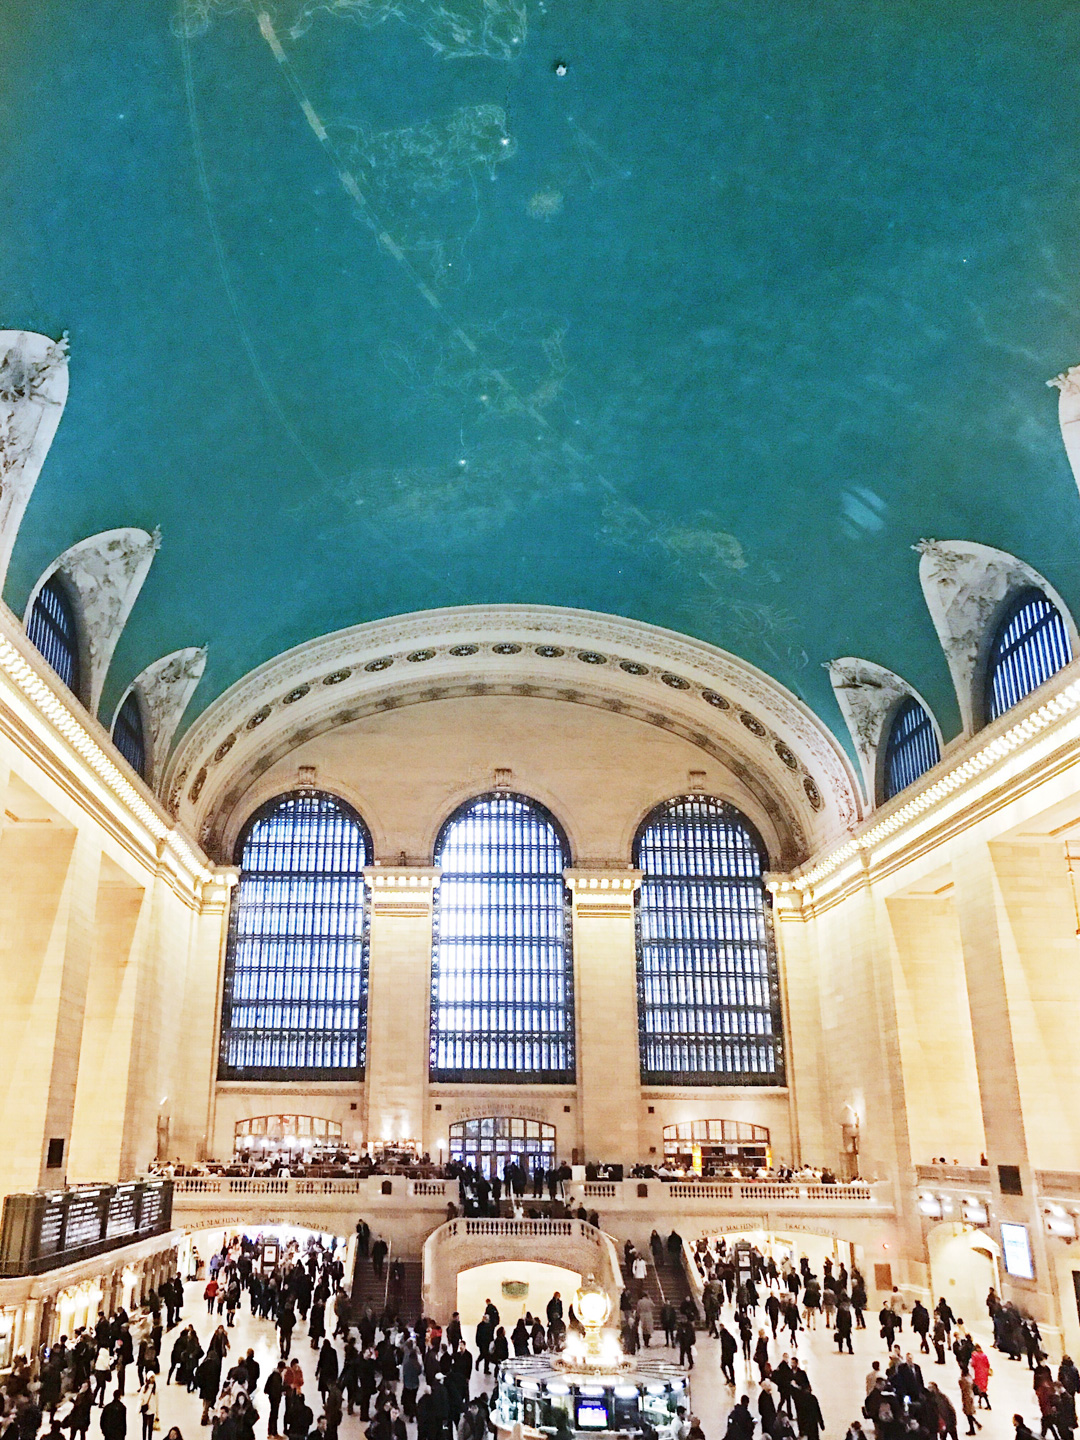 Grand Central Station in NYC